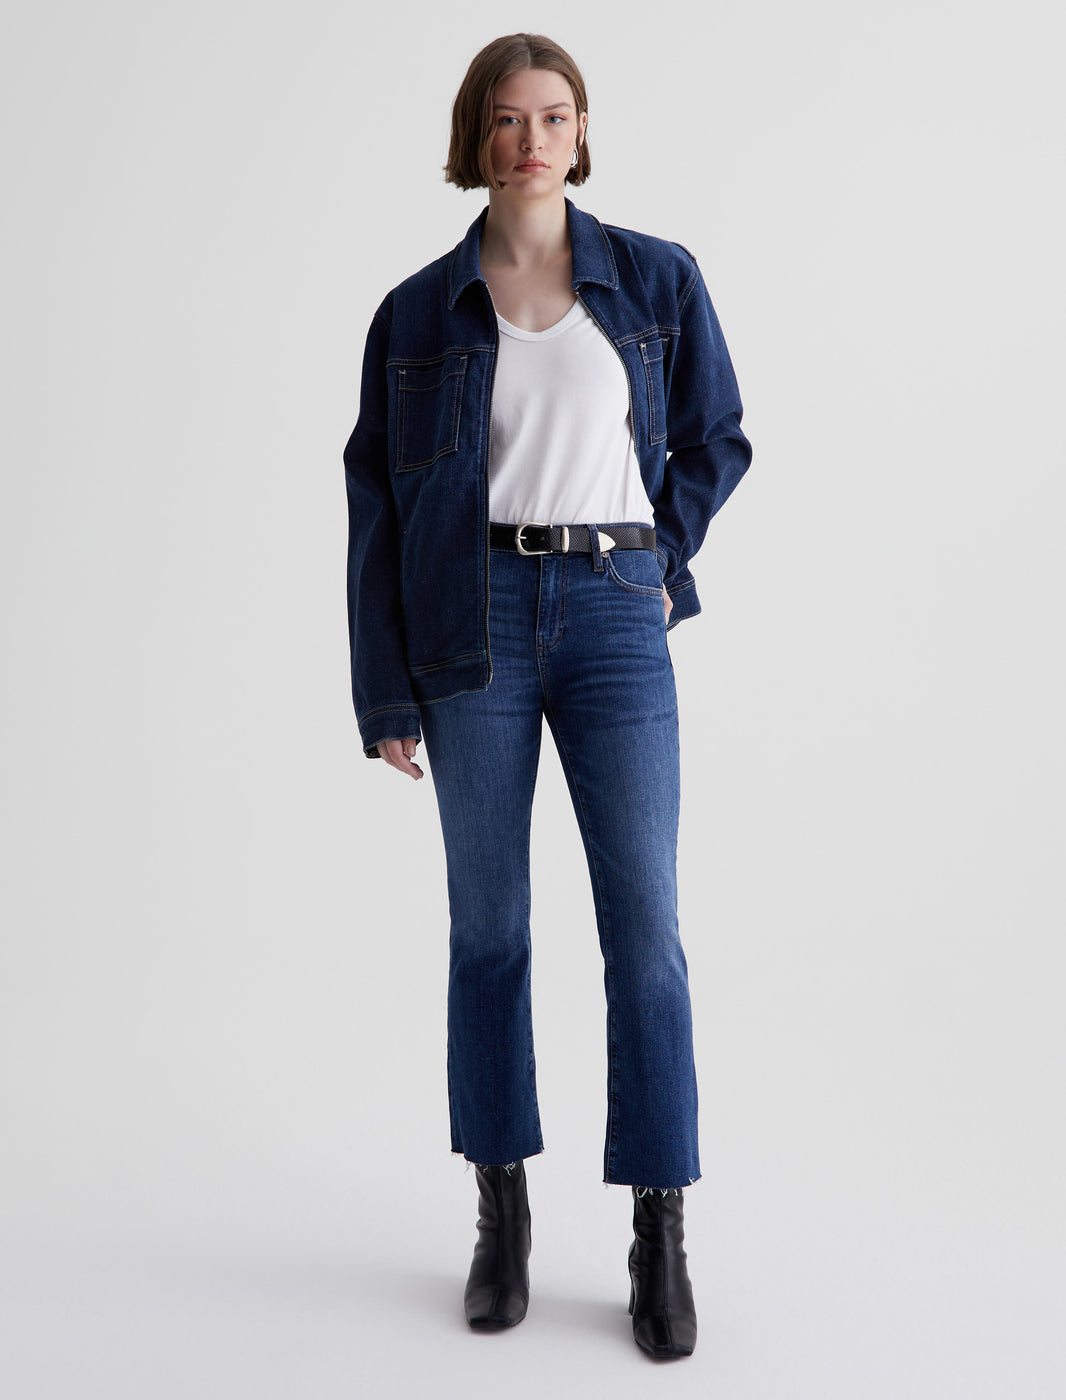 Women's Cropped Jeans, Explore our New Arrivals